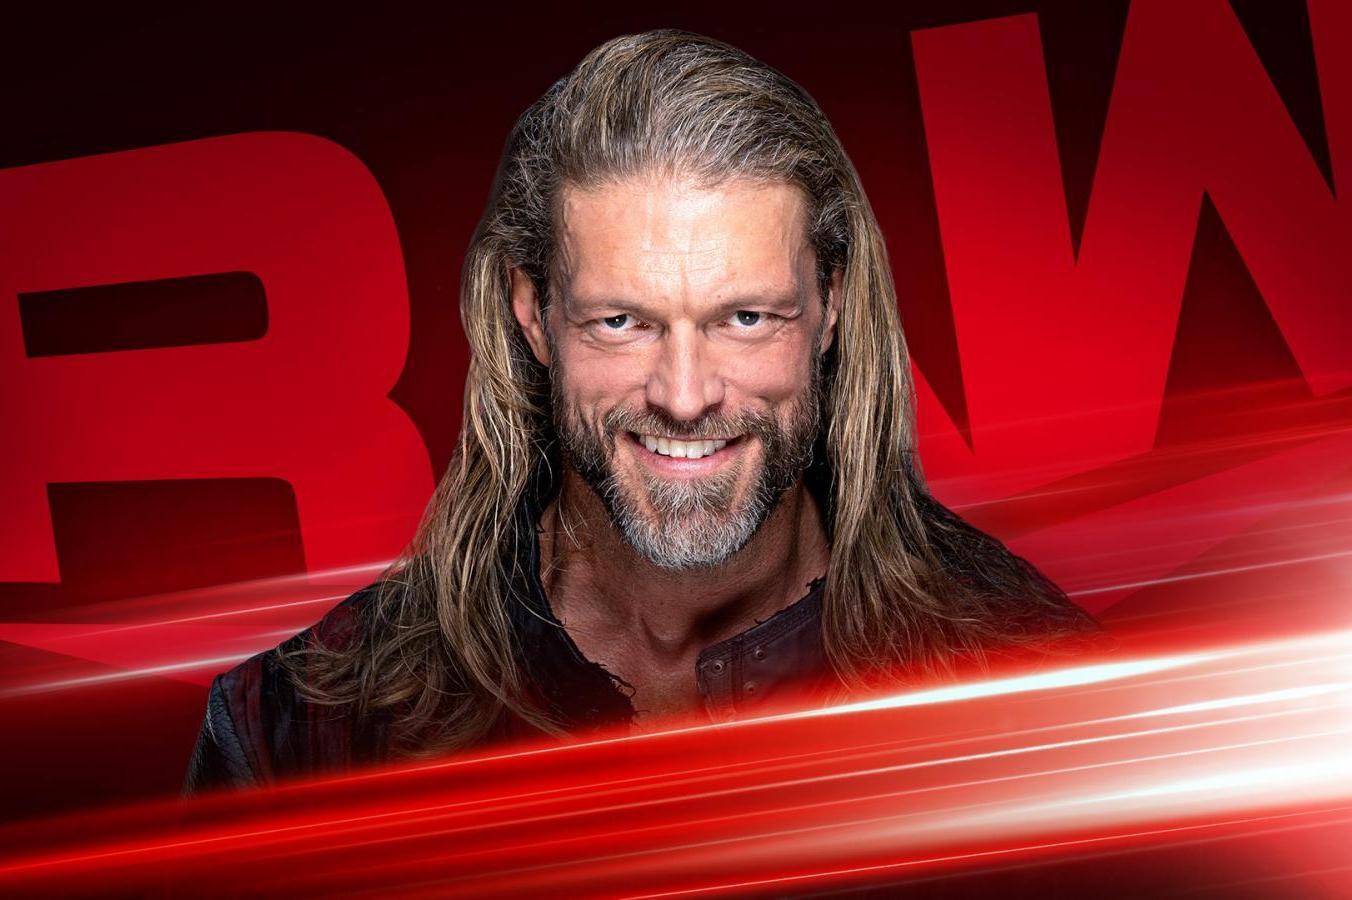 Wwe Raw Results Winners Grades Reaction And Highlights From March 9 Bleacher Report Latest News Videos And Highlights